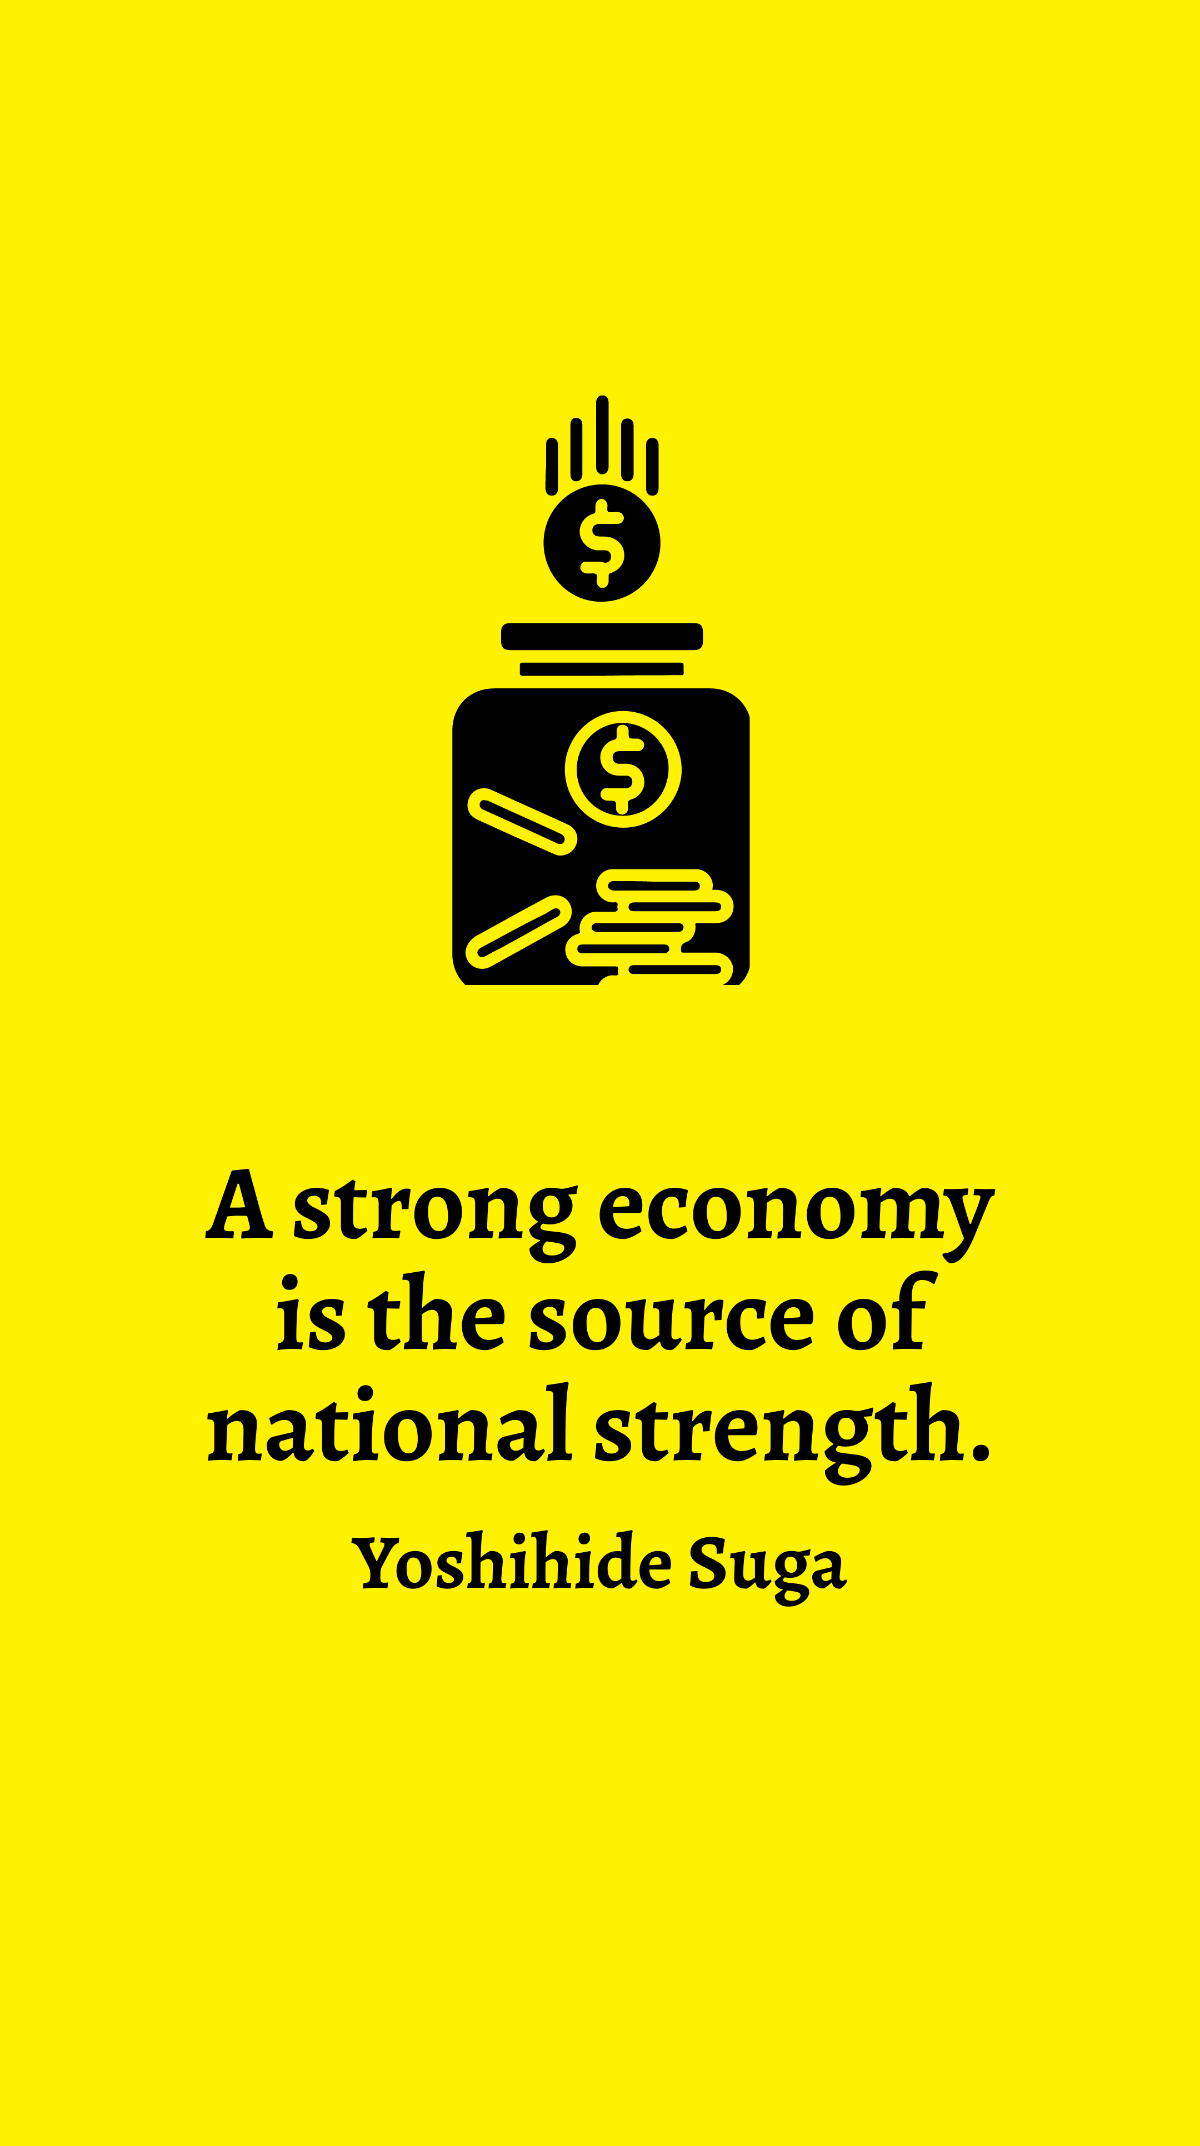 Yoshihide Suga - A strong economy is the source of national strength. Template